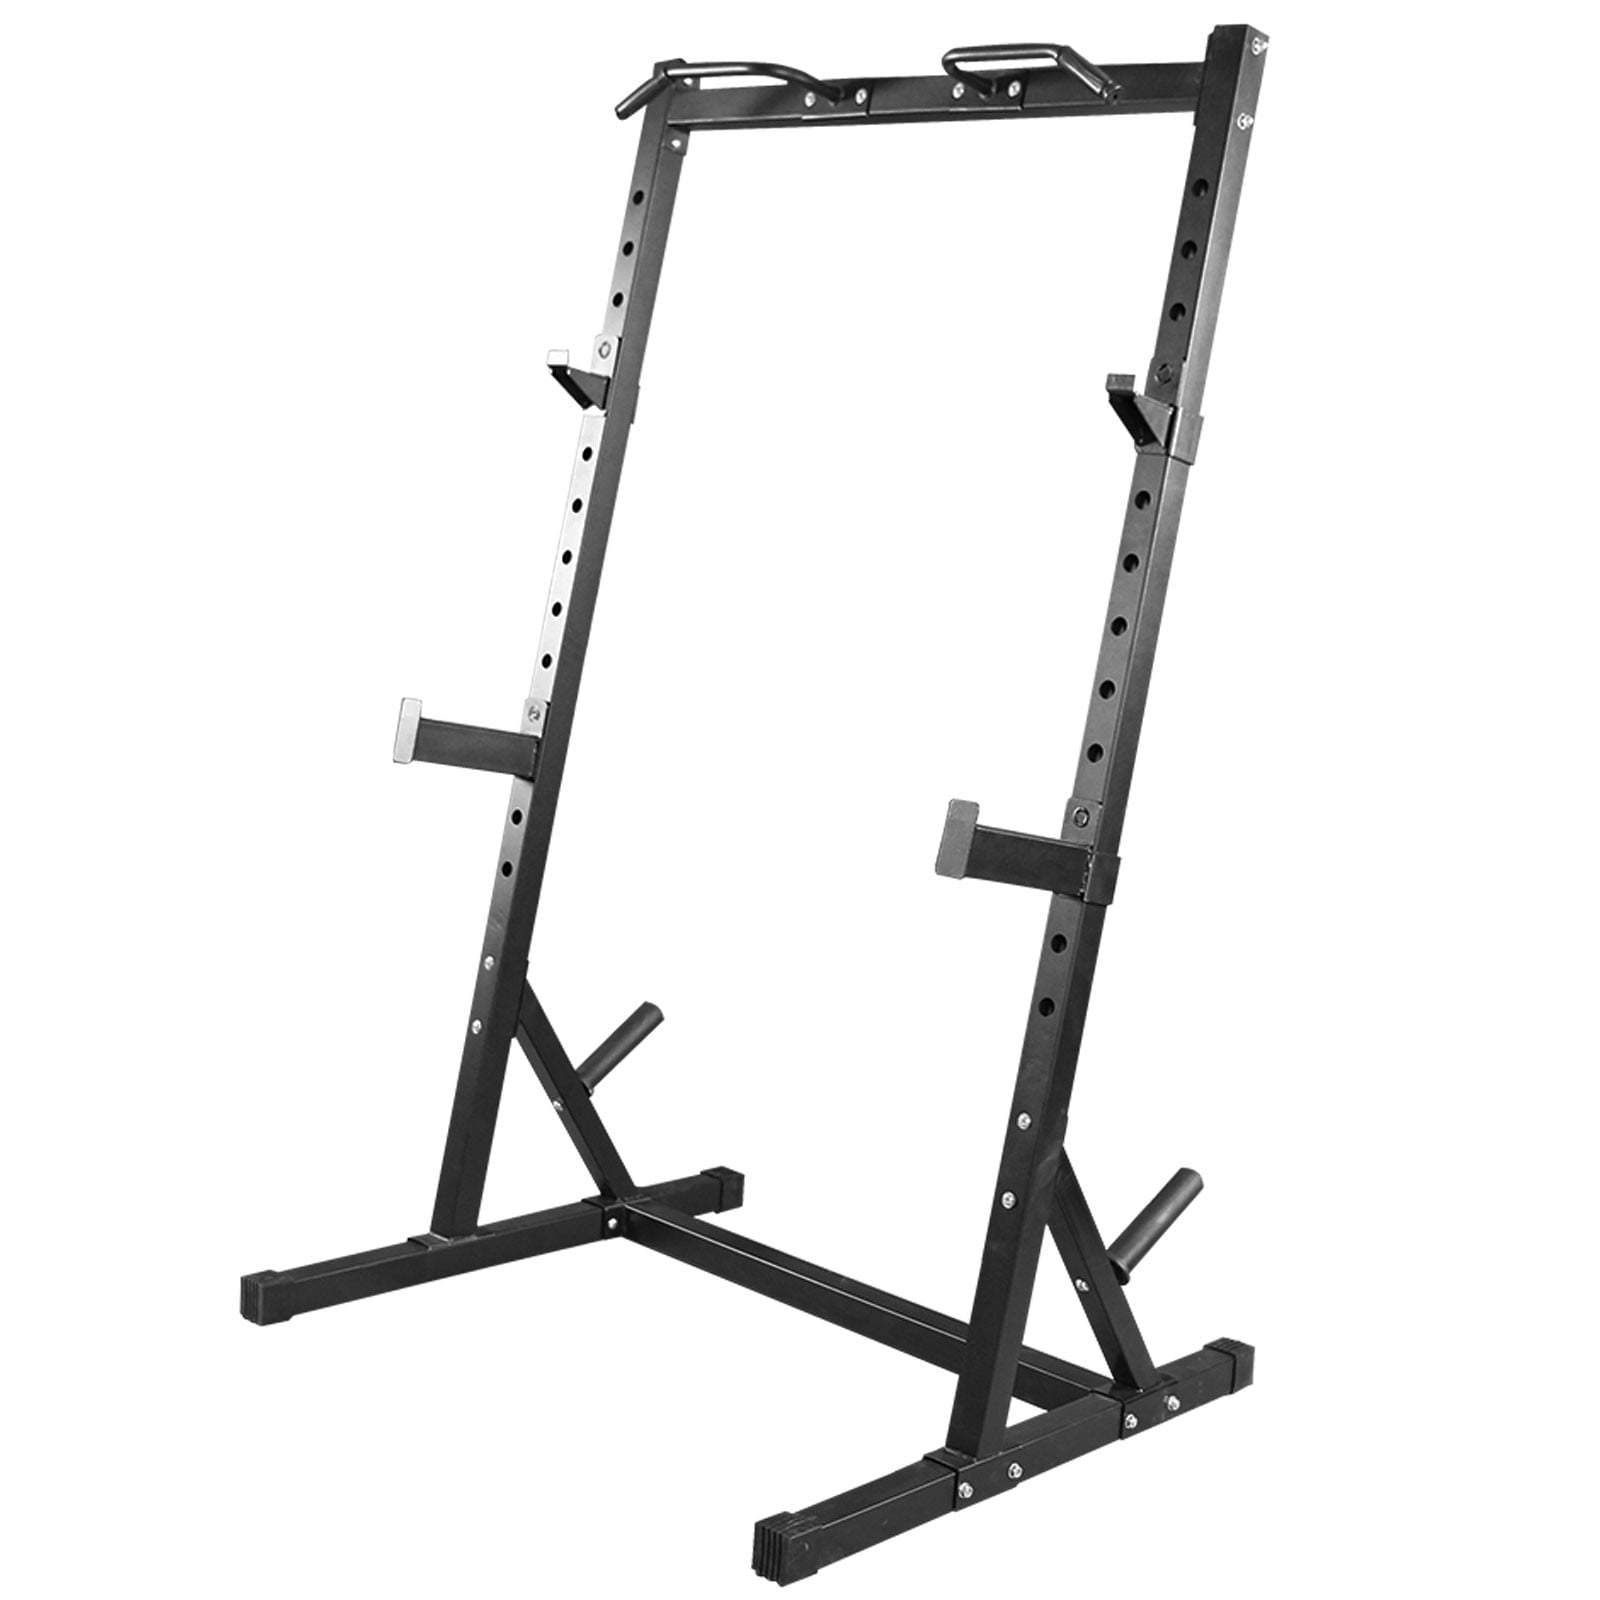 Details about   Heavy Duty Multi-Function Half FrameOlympic Fitness Power Cage Squat Rack NEW 